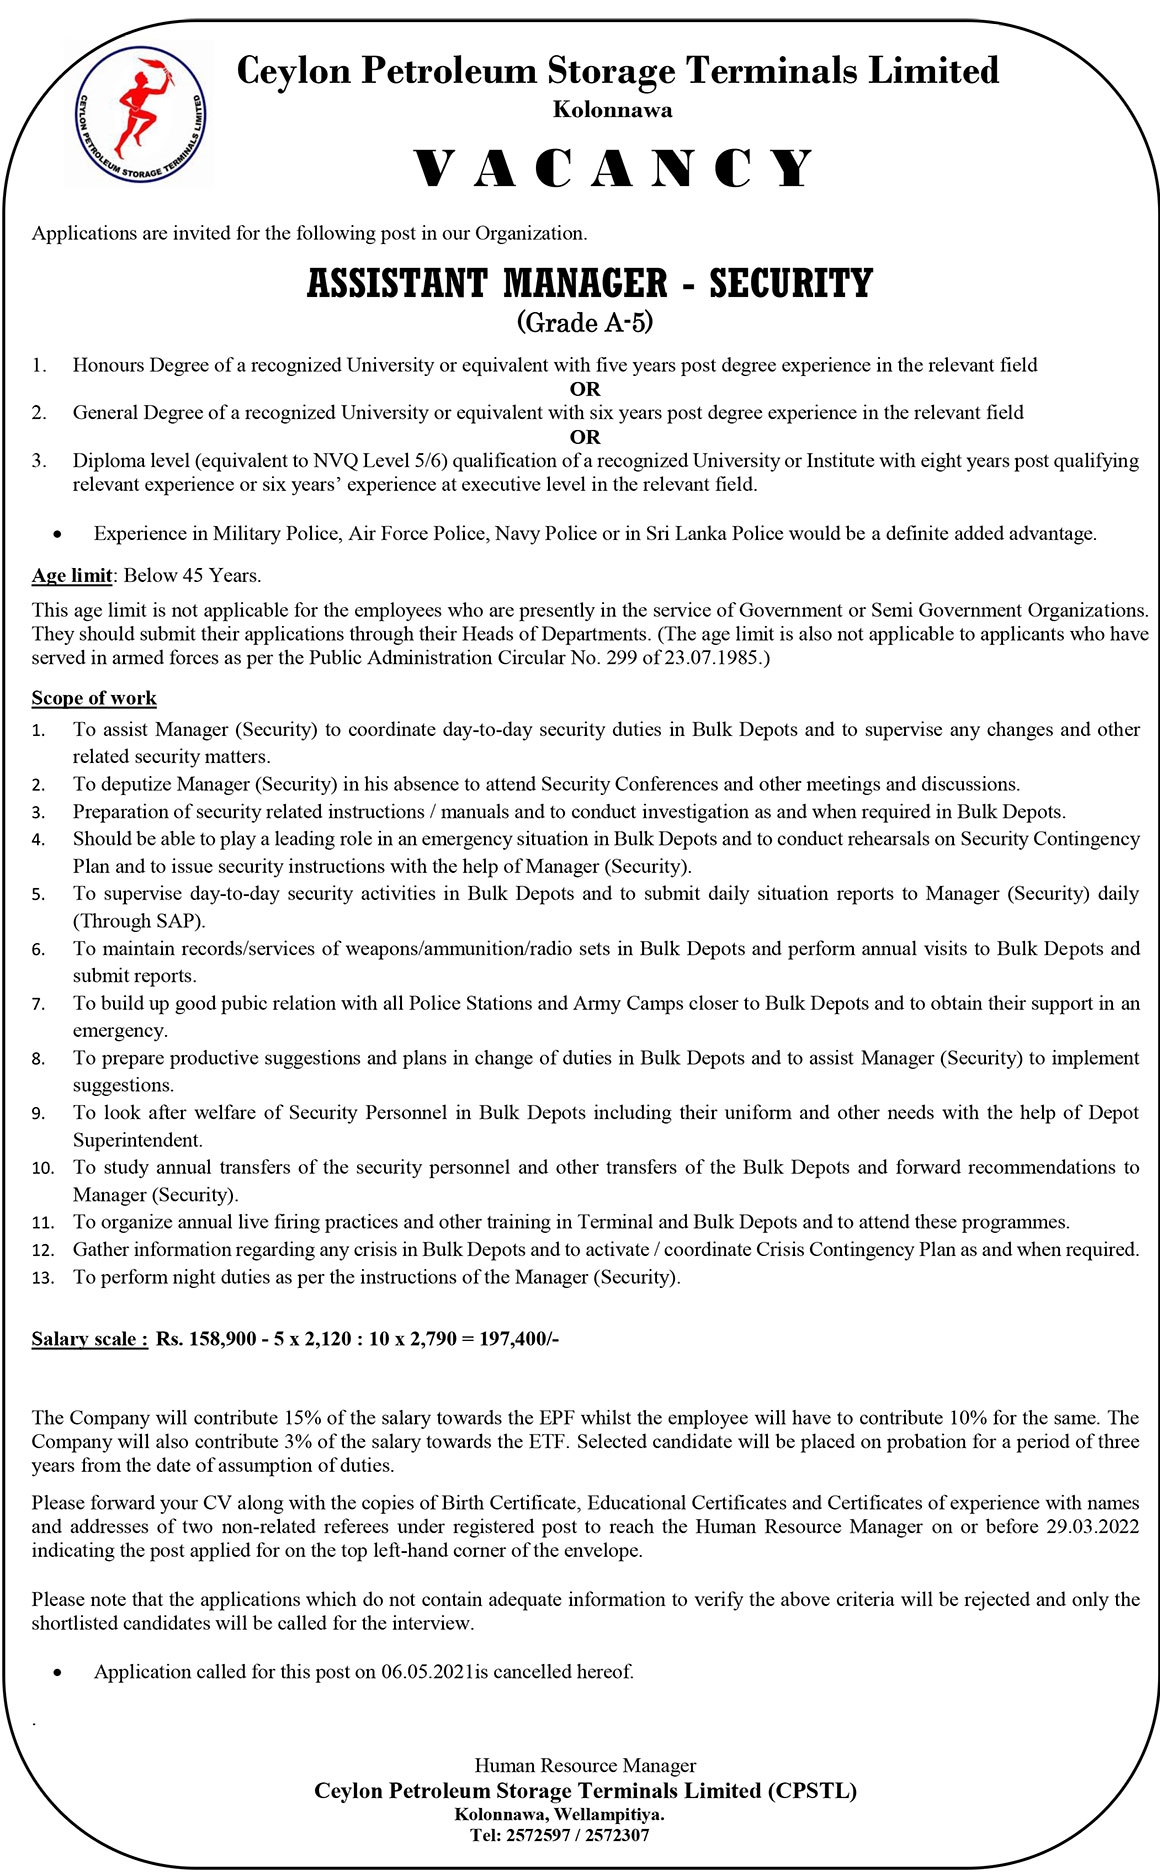 Assistant Manager (Security) – Ceylon Petroleum Storage Terminals Limited